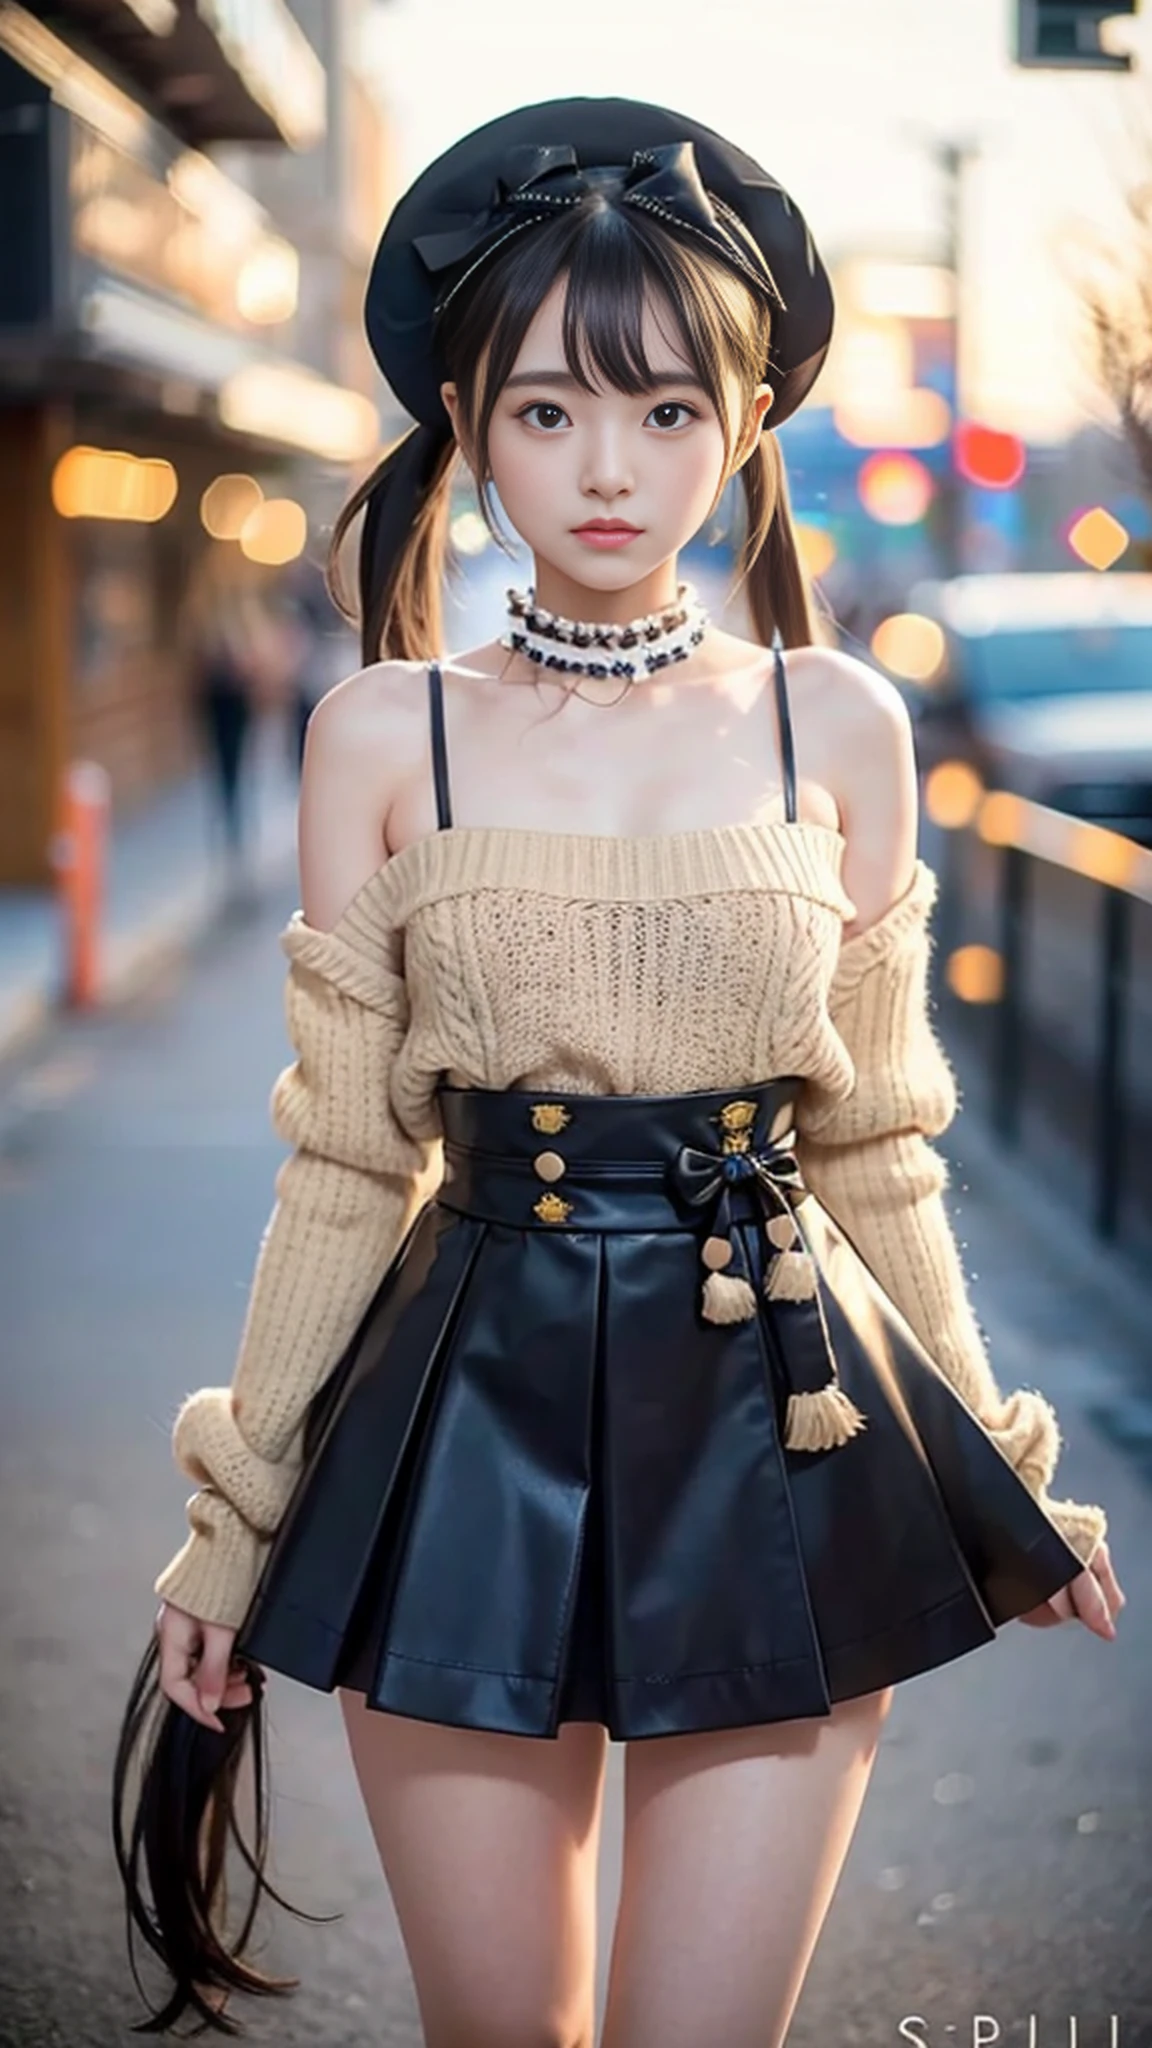 Thigh gaps, (((slim figure))),(((AKB 48))(Full body photo)), (sunset in the background))),(19 years old),(Small bust)))))), ((Wearing a hat deeply)))), (Long skirt)))), (Spring sweater)))), (Photorealism: 6, real)))), ((( Sideways and turning pose)),Perfect lower body shape,((Upside ponytail)),(Ribbon),(Has scrunchies on wrists)),Hair ornaments,Small waist